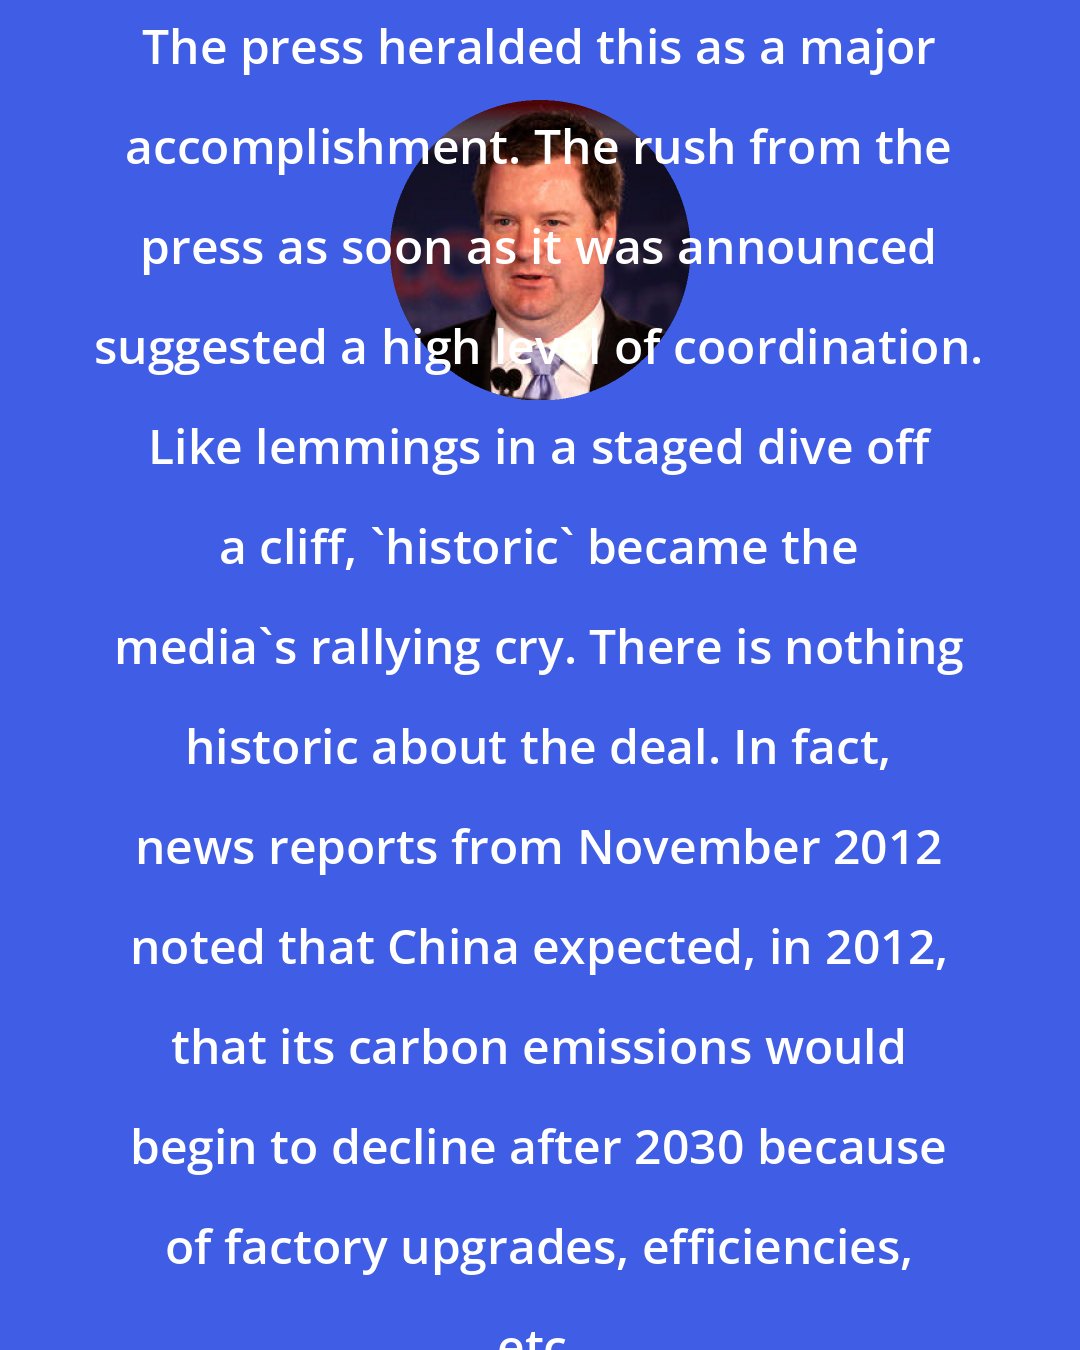 Erick Erickson: The press heralded this as a major accomplishment. The rush from the press as soon as it was announced suggested a high level of coordination. Like lemmings in a staged dive off a cliff, 'historic' became the media's rallying cry. There is nothing historic about the deal. In fact, news reports from November 2012 noted that China expected, in 2012, that its carbon emissions would begin to decline after 2030 because of factory upgrades, efficiencies, etc.